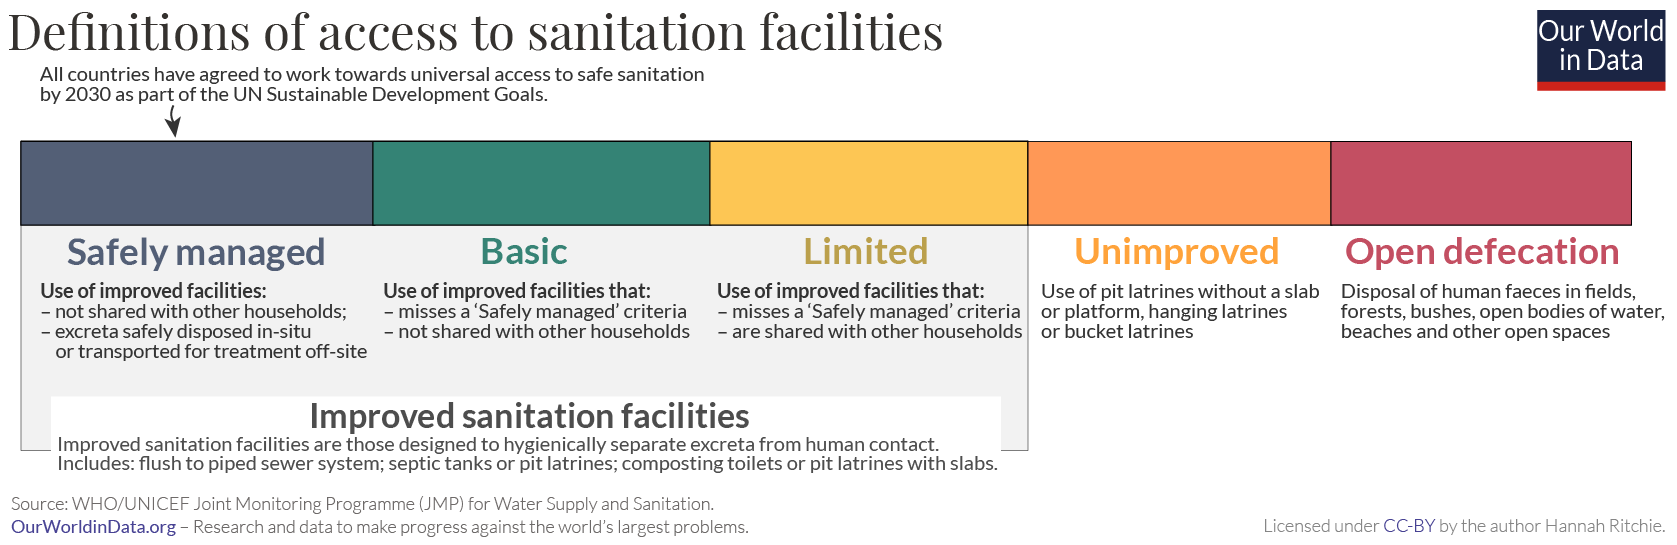 Definition of access to sanitation facilities